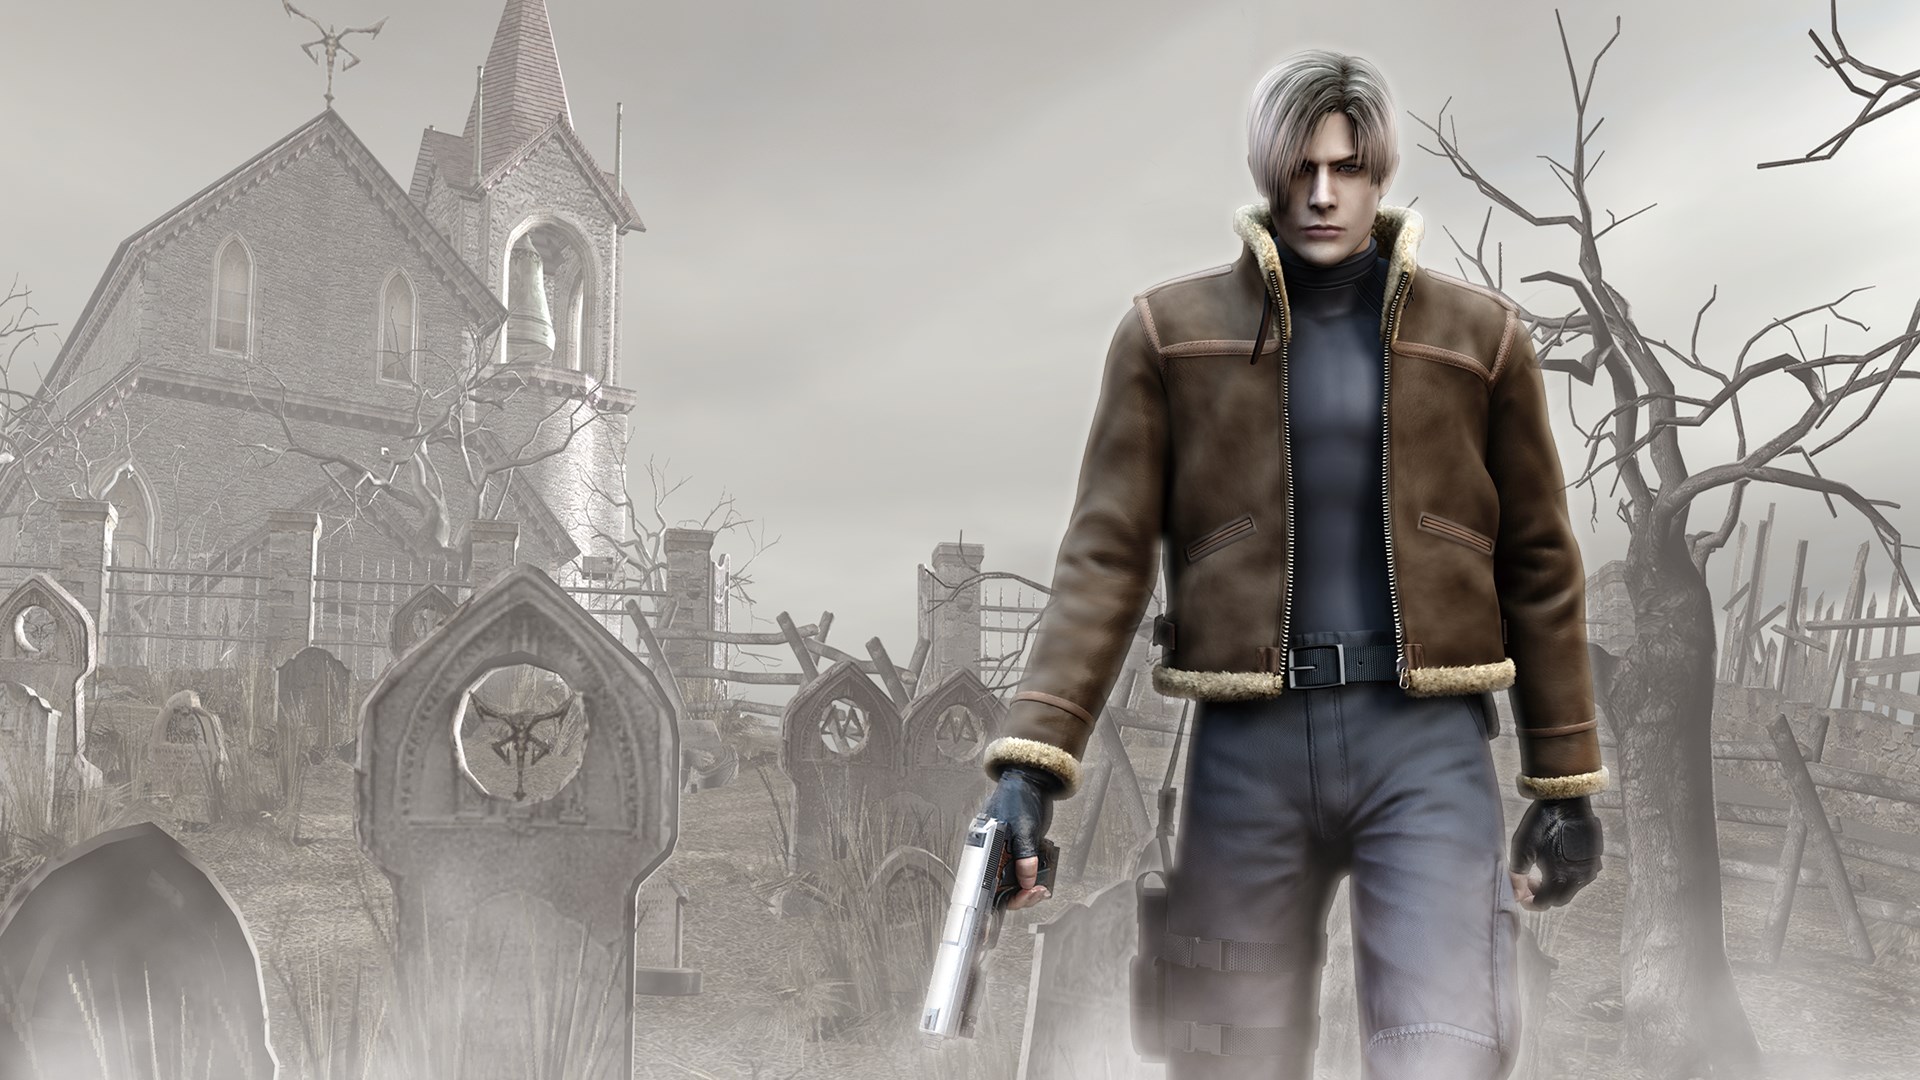 Resident Evil 4 Remake Shows Off the Infamous Village Section, Merchant,  and Much More